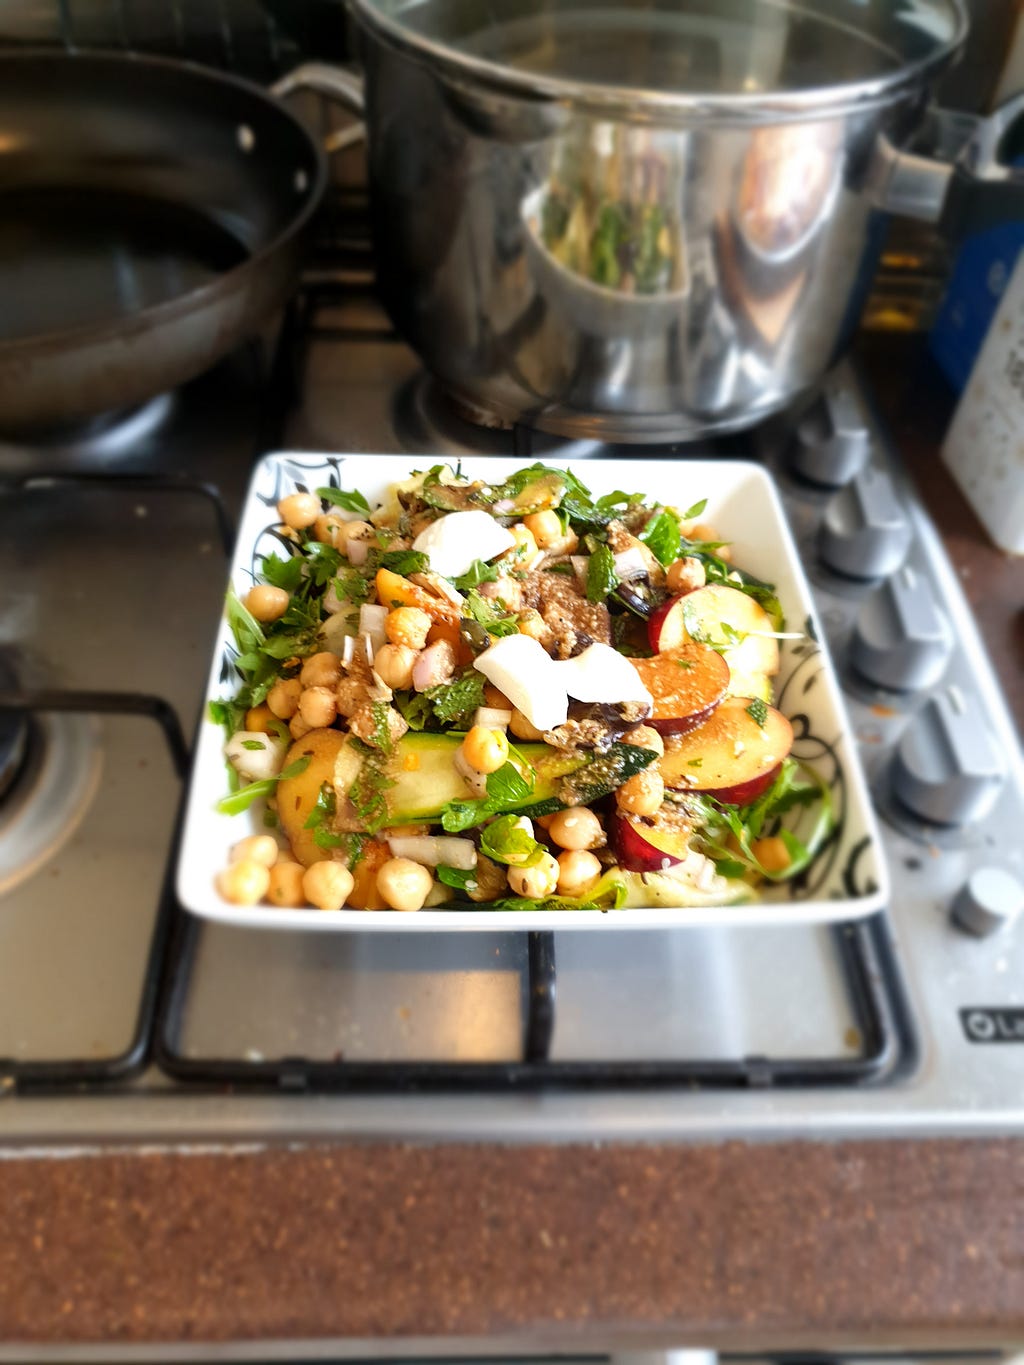 A gas hob with a bowl of food on it and two pans in the background.